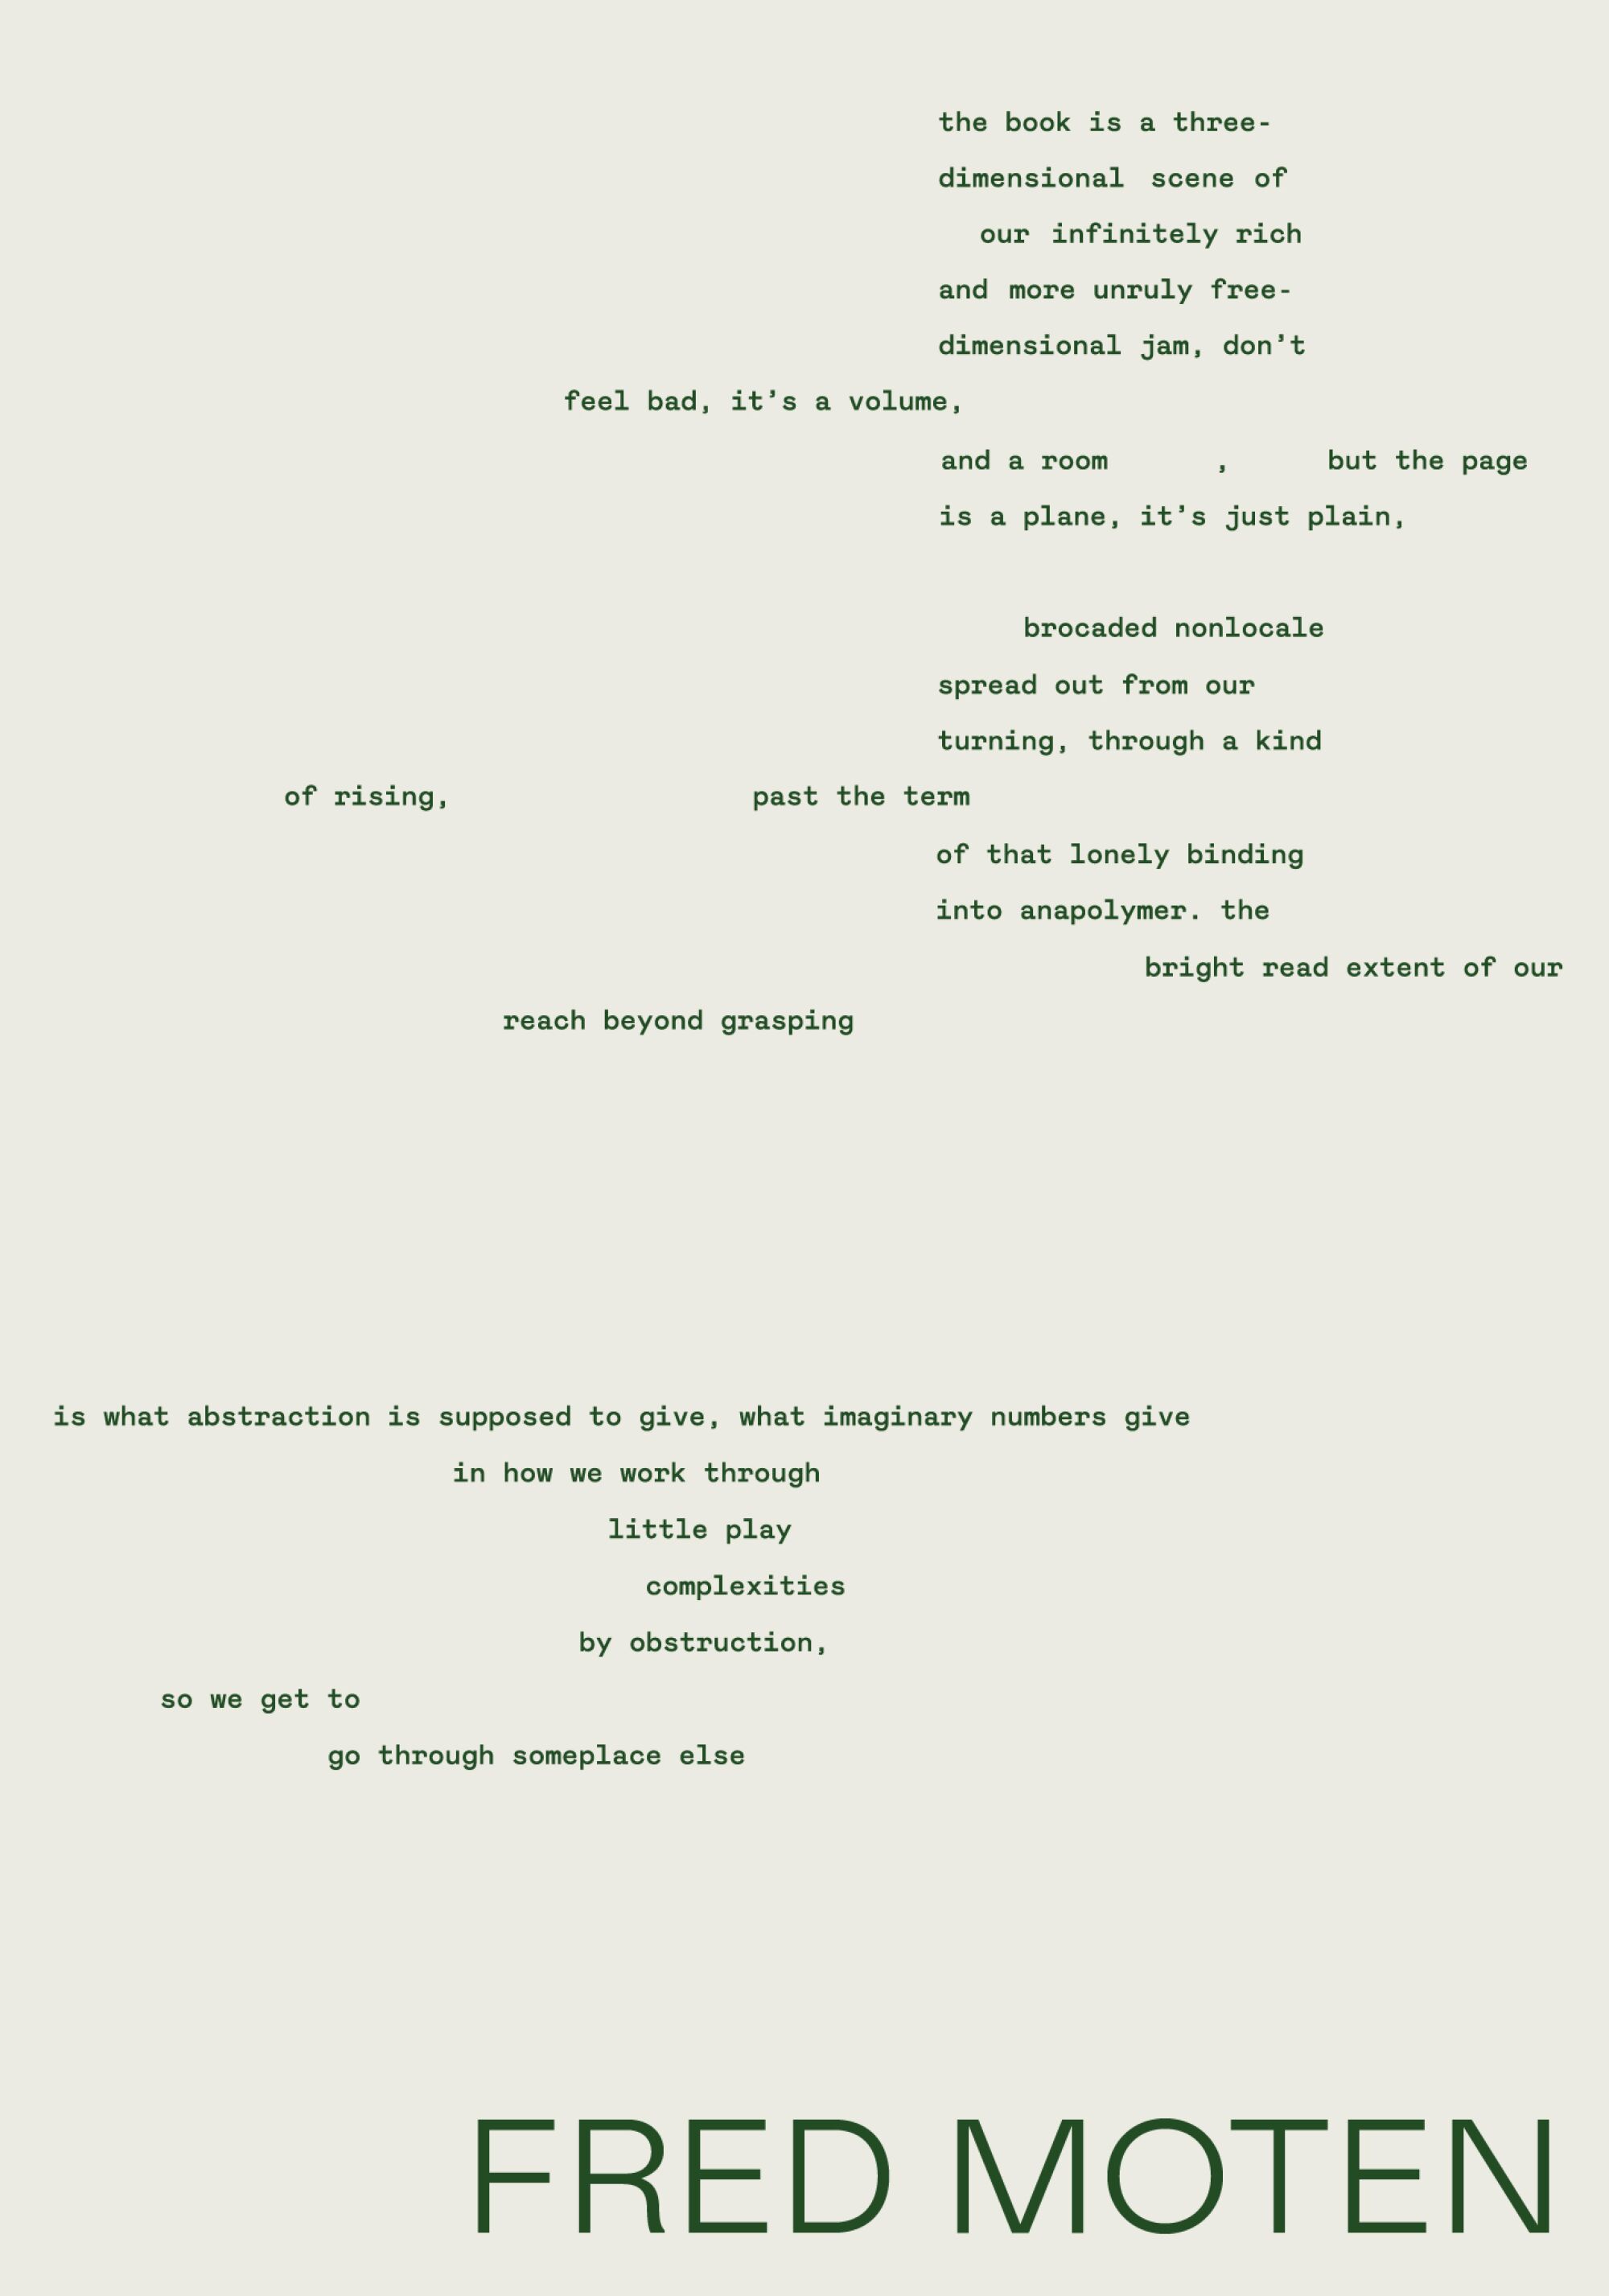 Fred Moten poem in green text on top of an off-white background